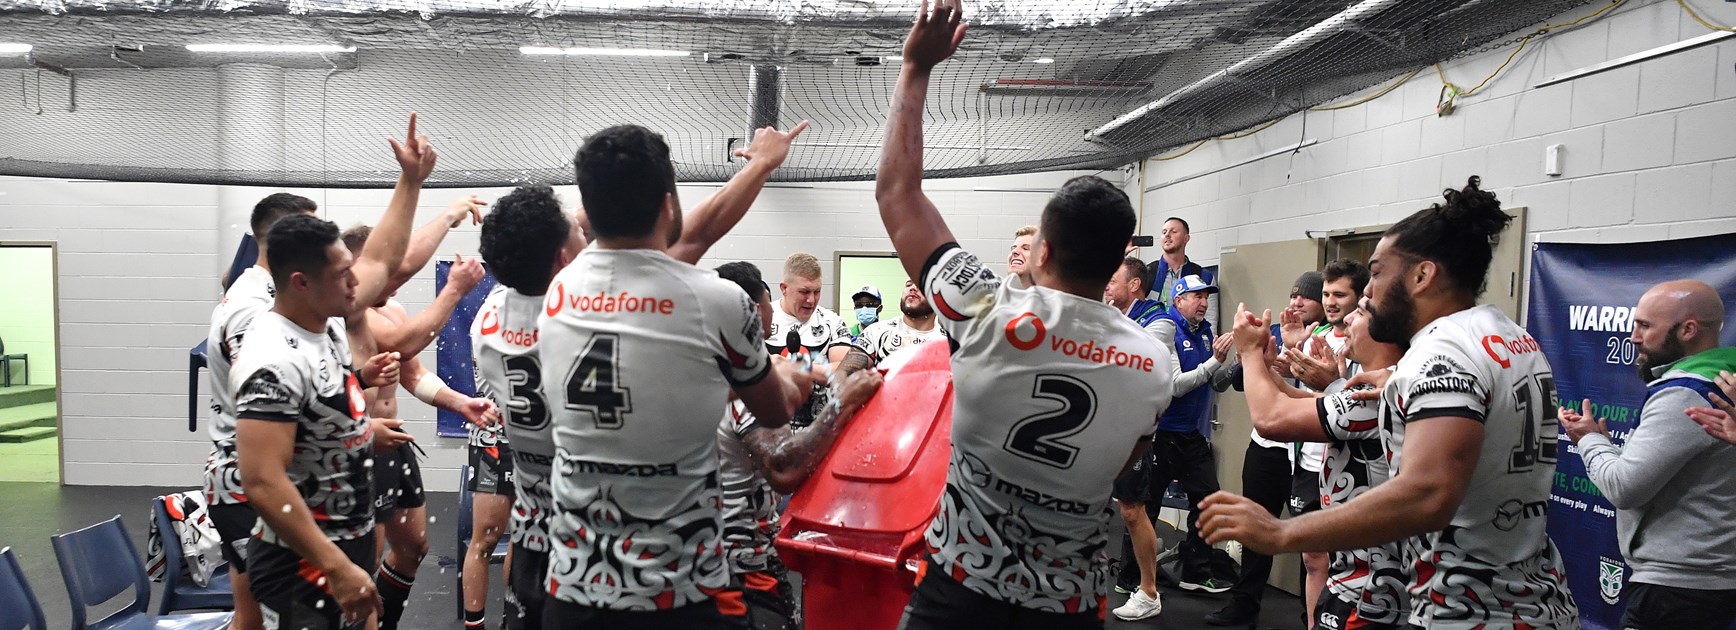 Warriors players celebrate a win.